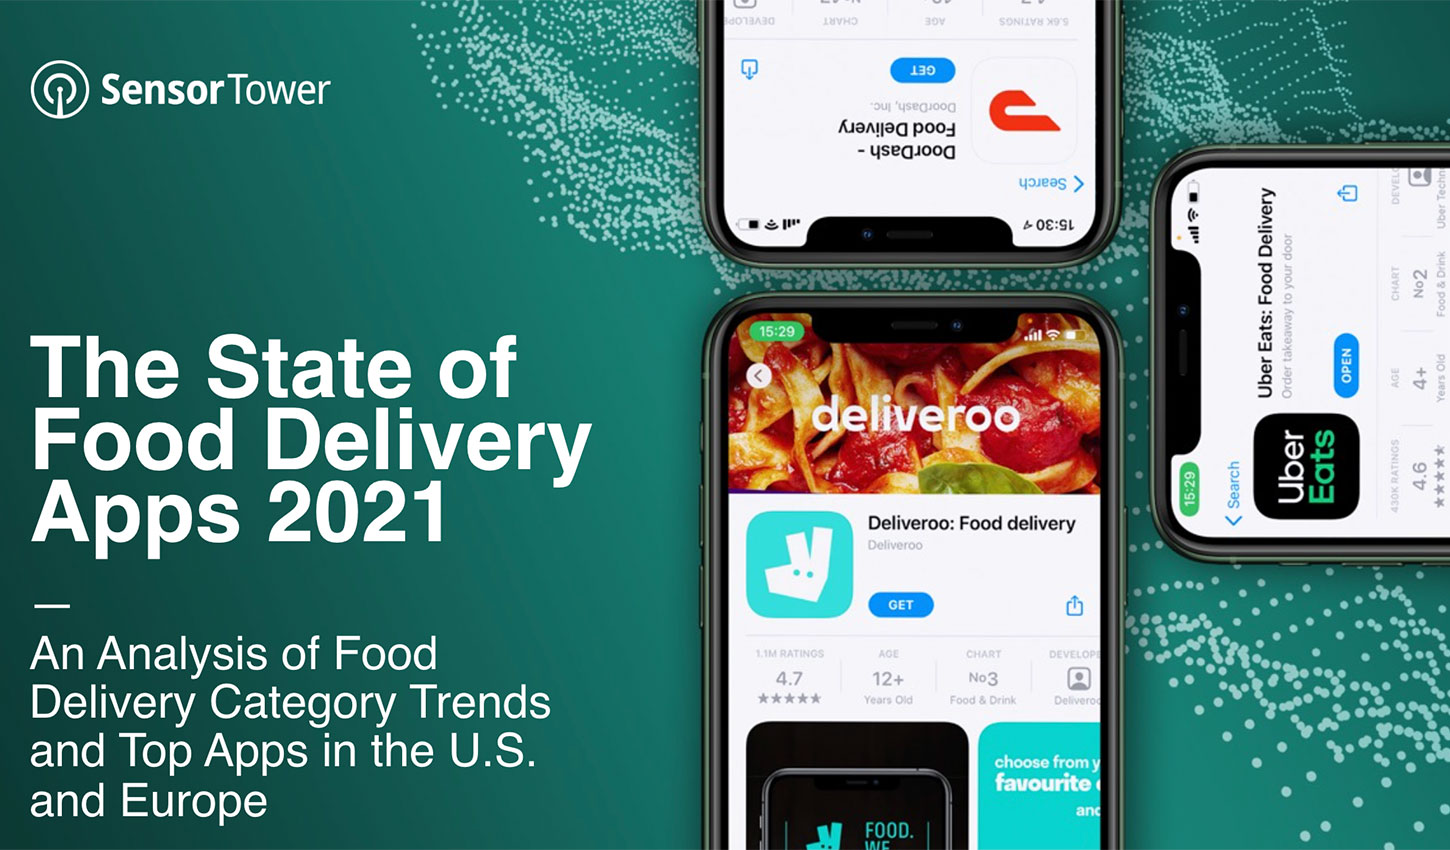 Sensor Tower's new food delivery report